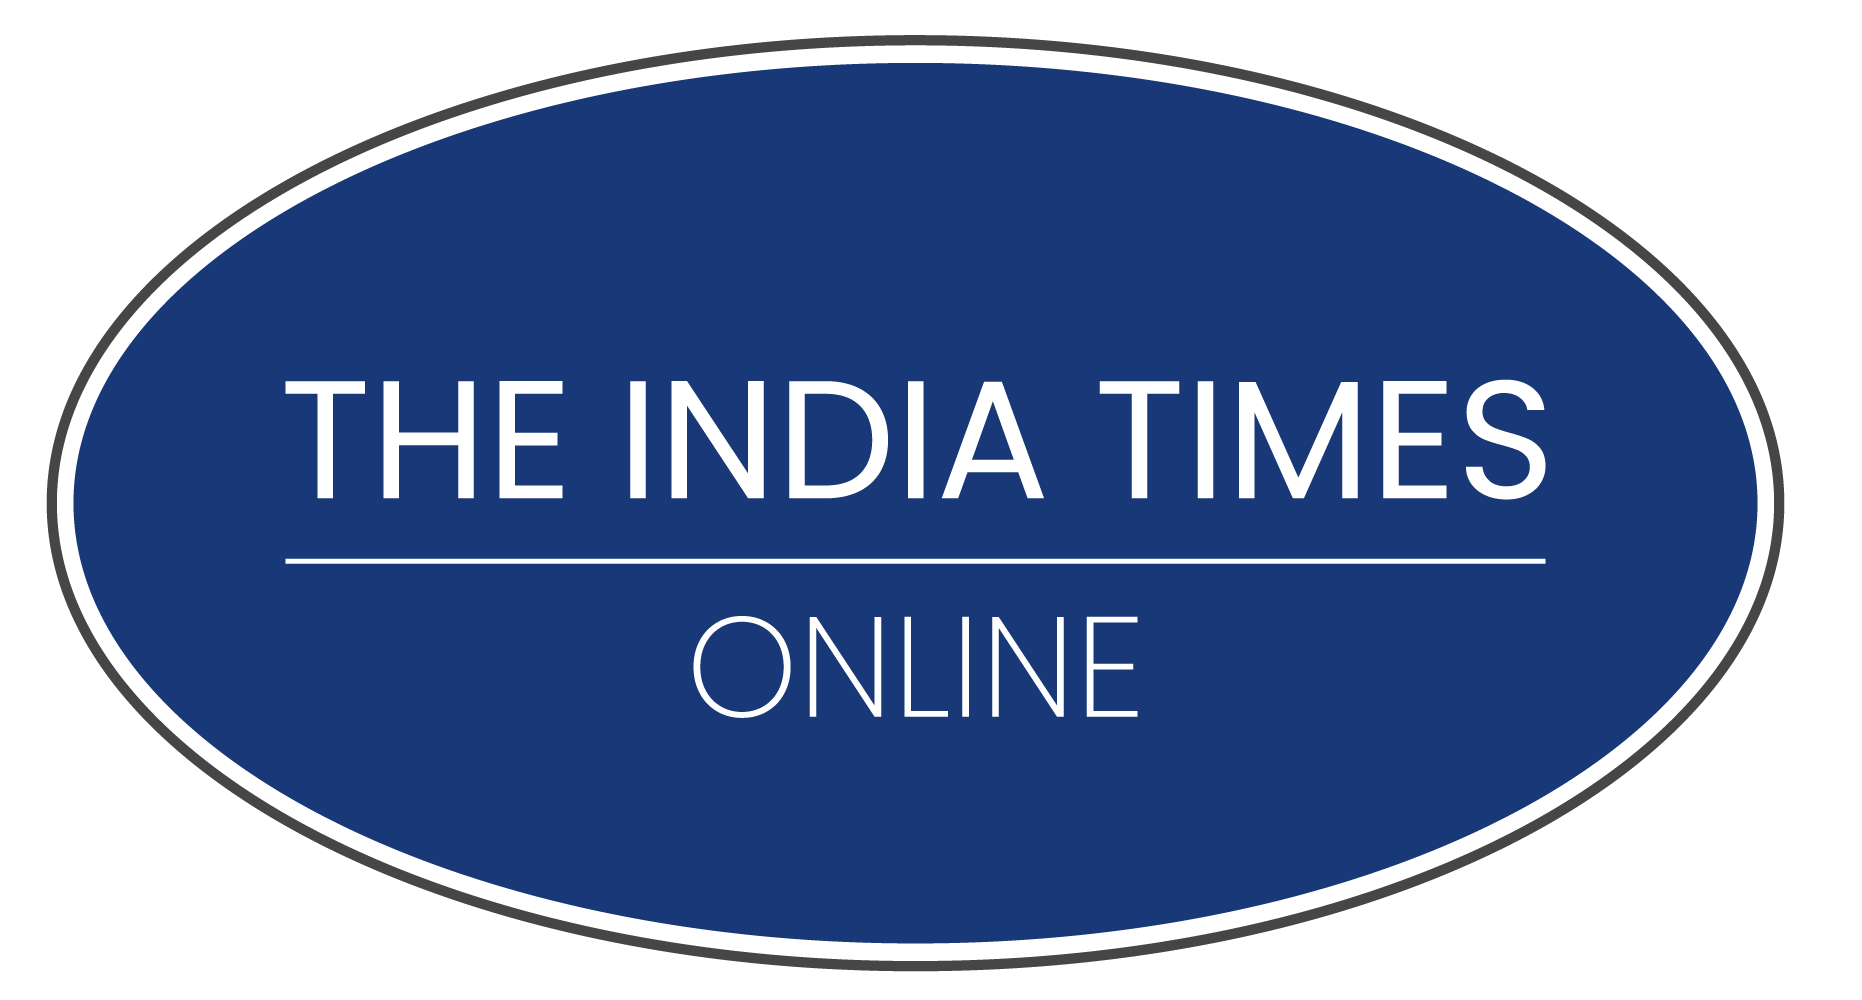 The India Times Online